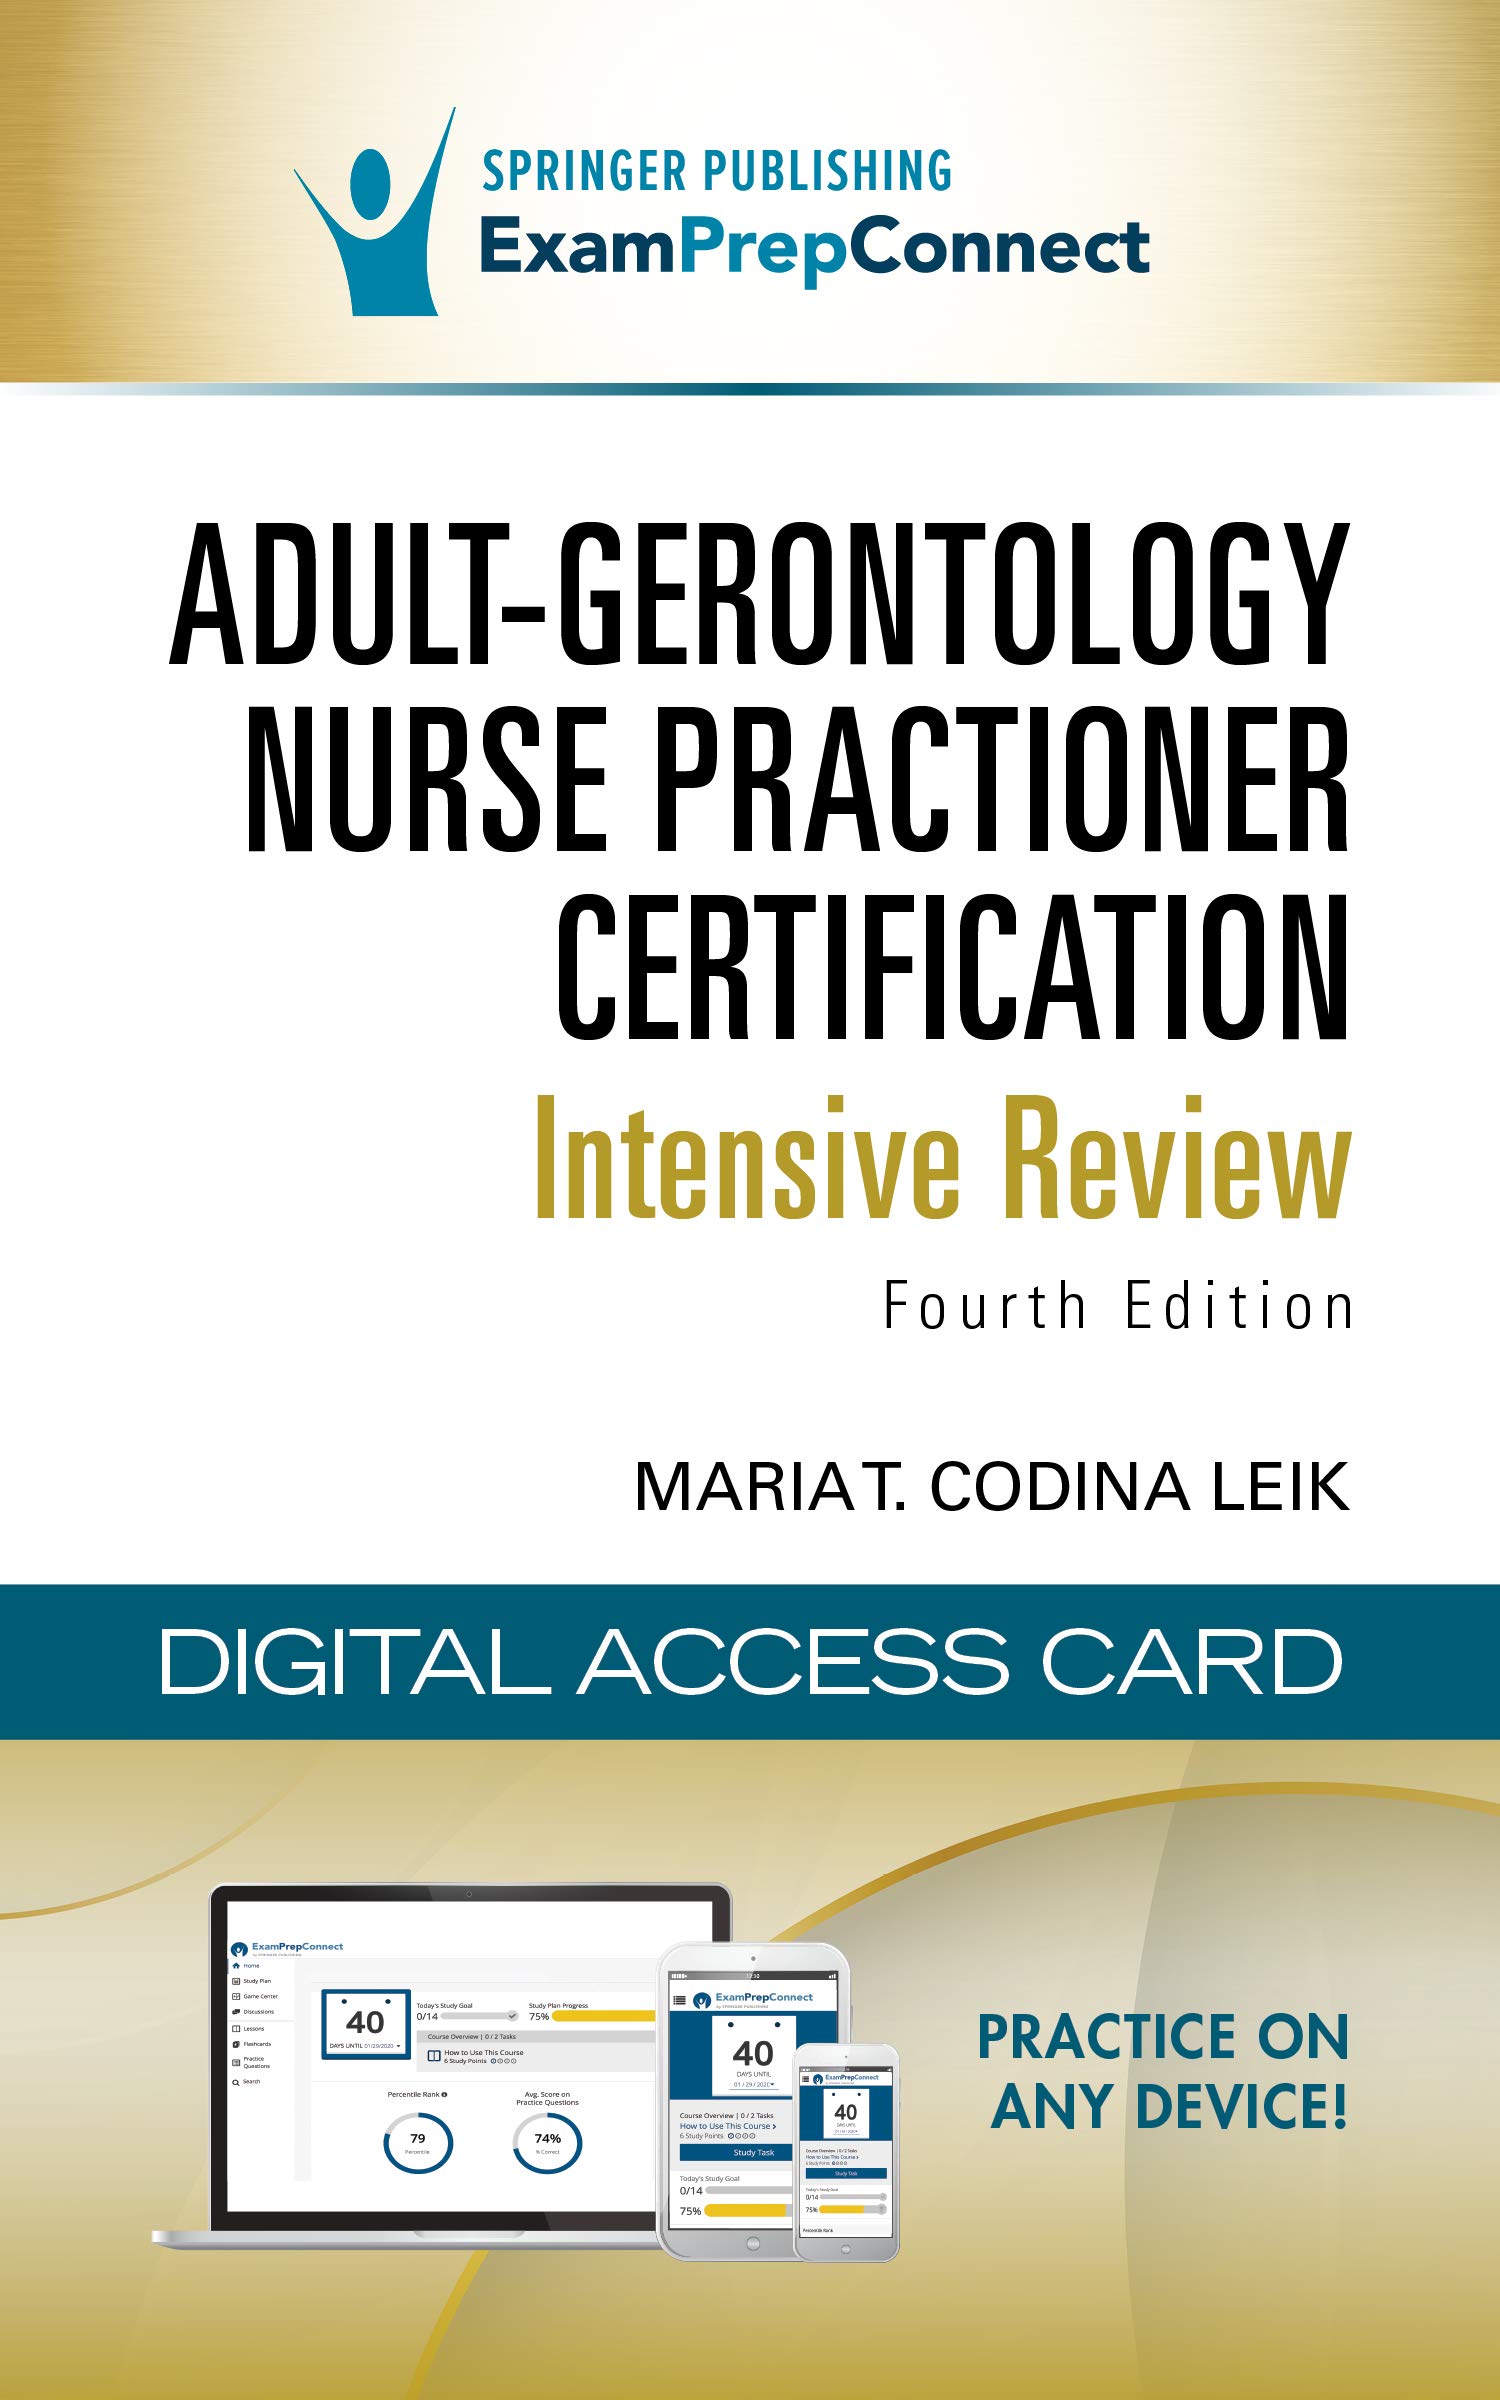 Adult-Gerontology Nurse Practitioner Certification Intensive Review, Fourth Edition (Digital Access Card: 6-Month Subscription): Web/iOS/Android/Am...